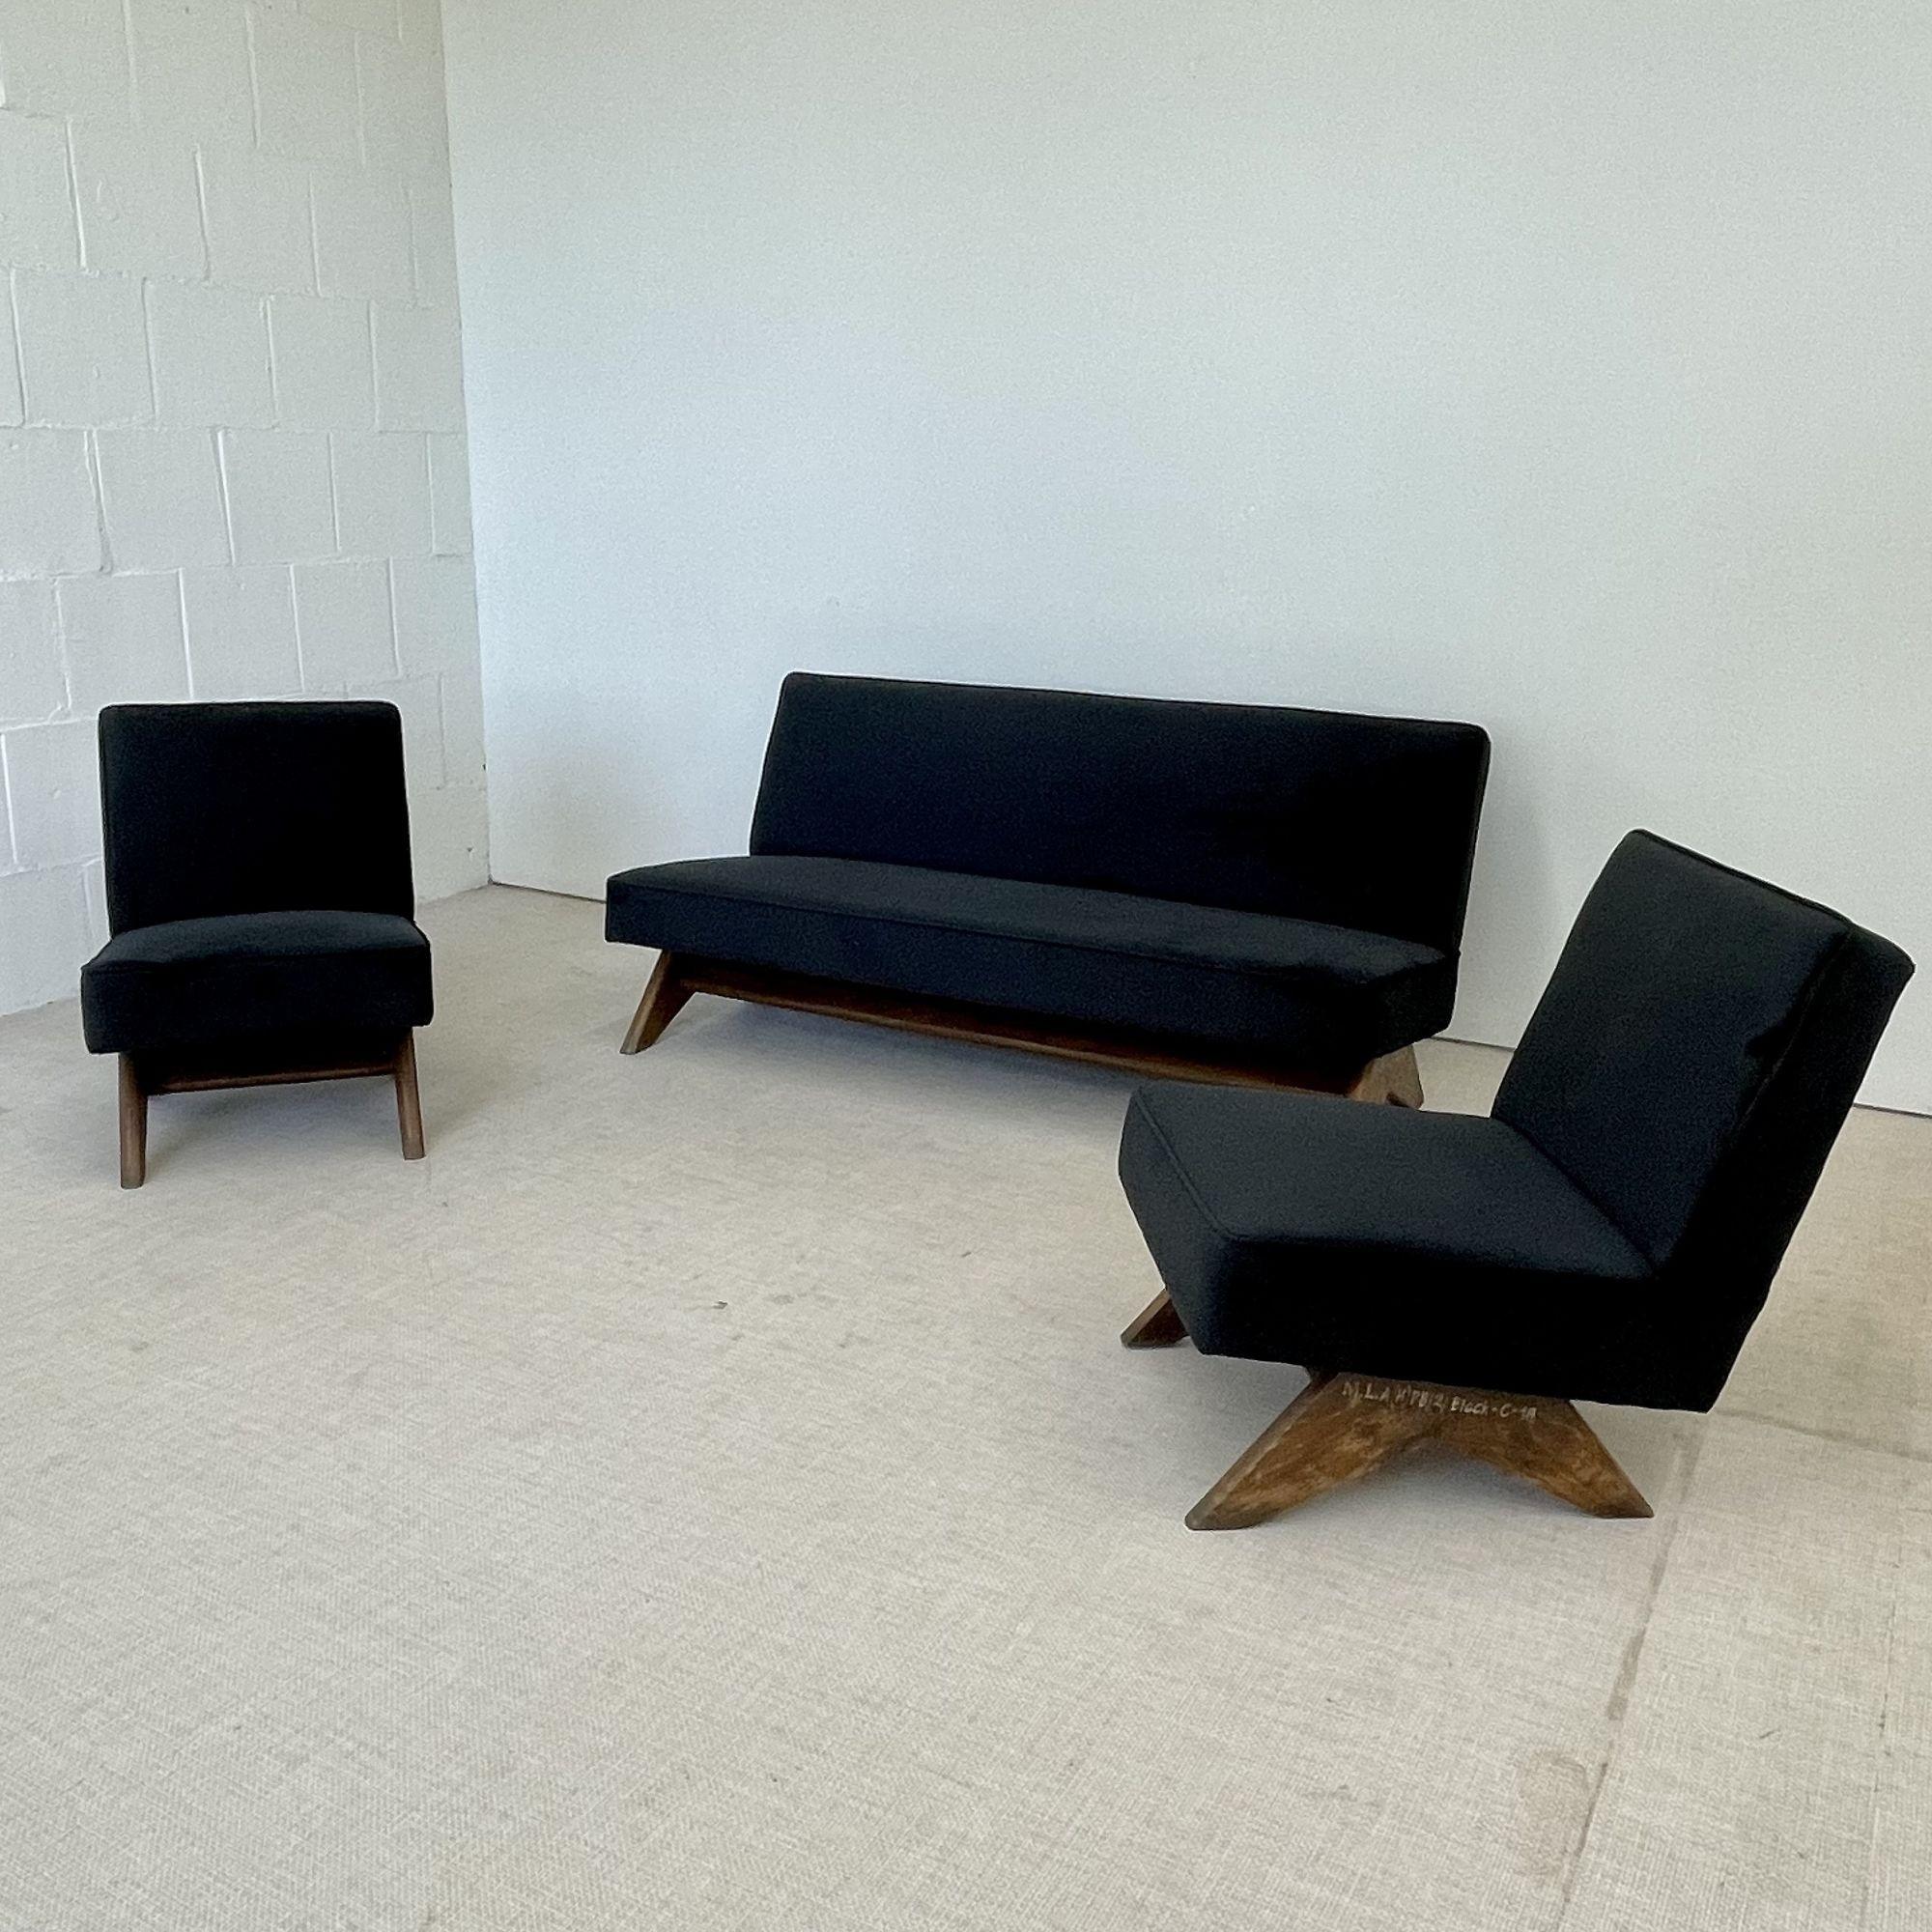 Pierre Jeanneret Upholstered Sofa Set, 'Fireside' Chairs and Sofa, Model PJ-SI-36-A/B
 
Lounge or slipper sofa set featuring a slightly tilted backrest and seat on top of a low compass type leg assembly.
 
Measures: Seat height: 14.50 in.
Chairs: